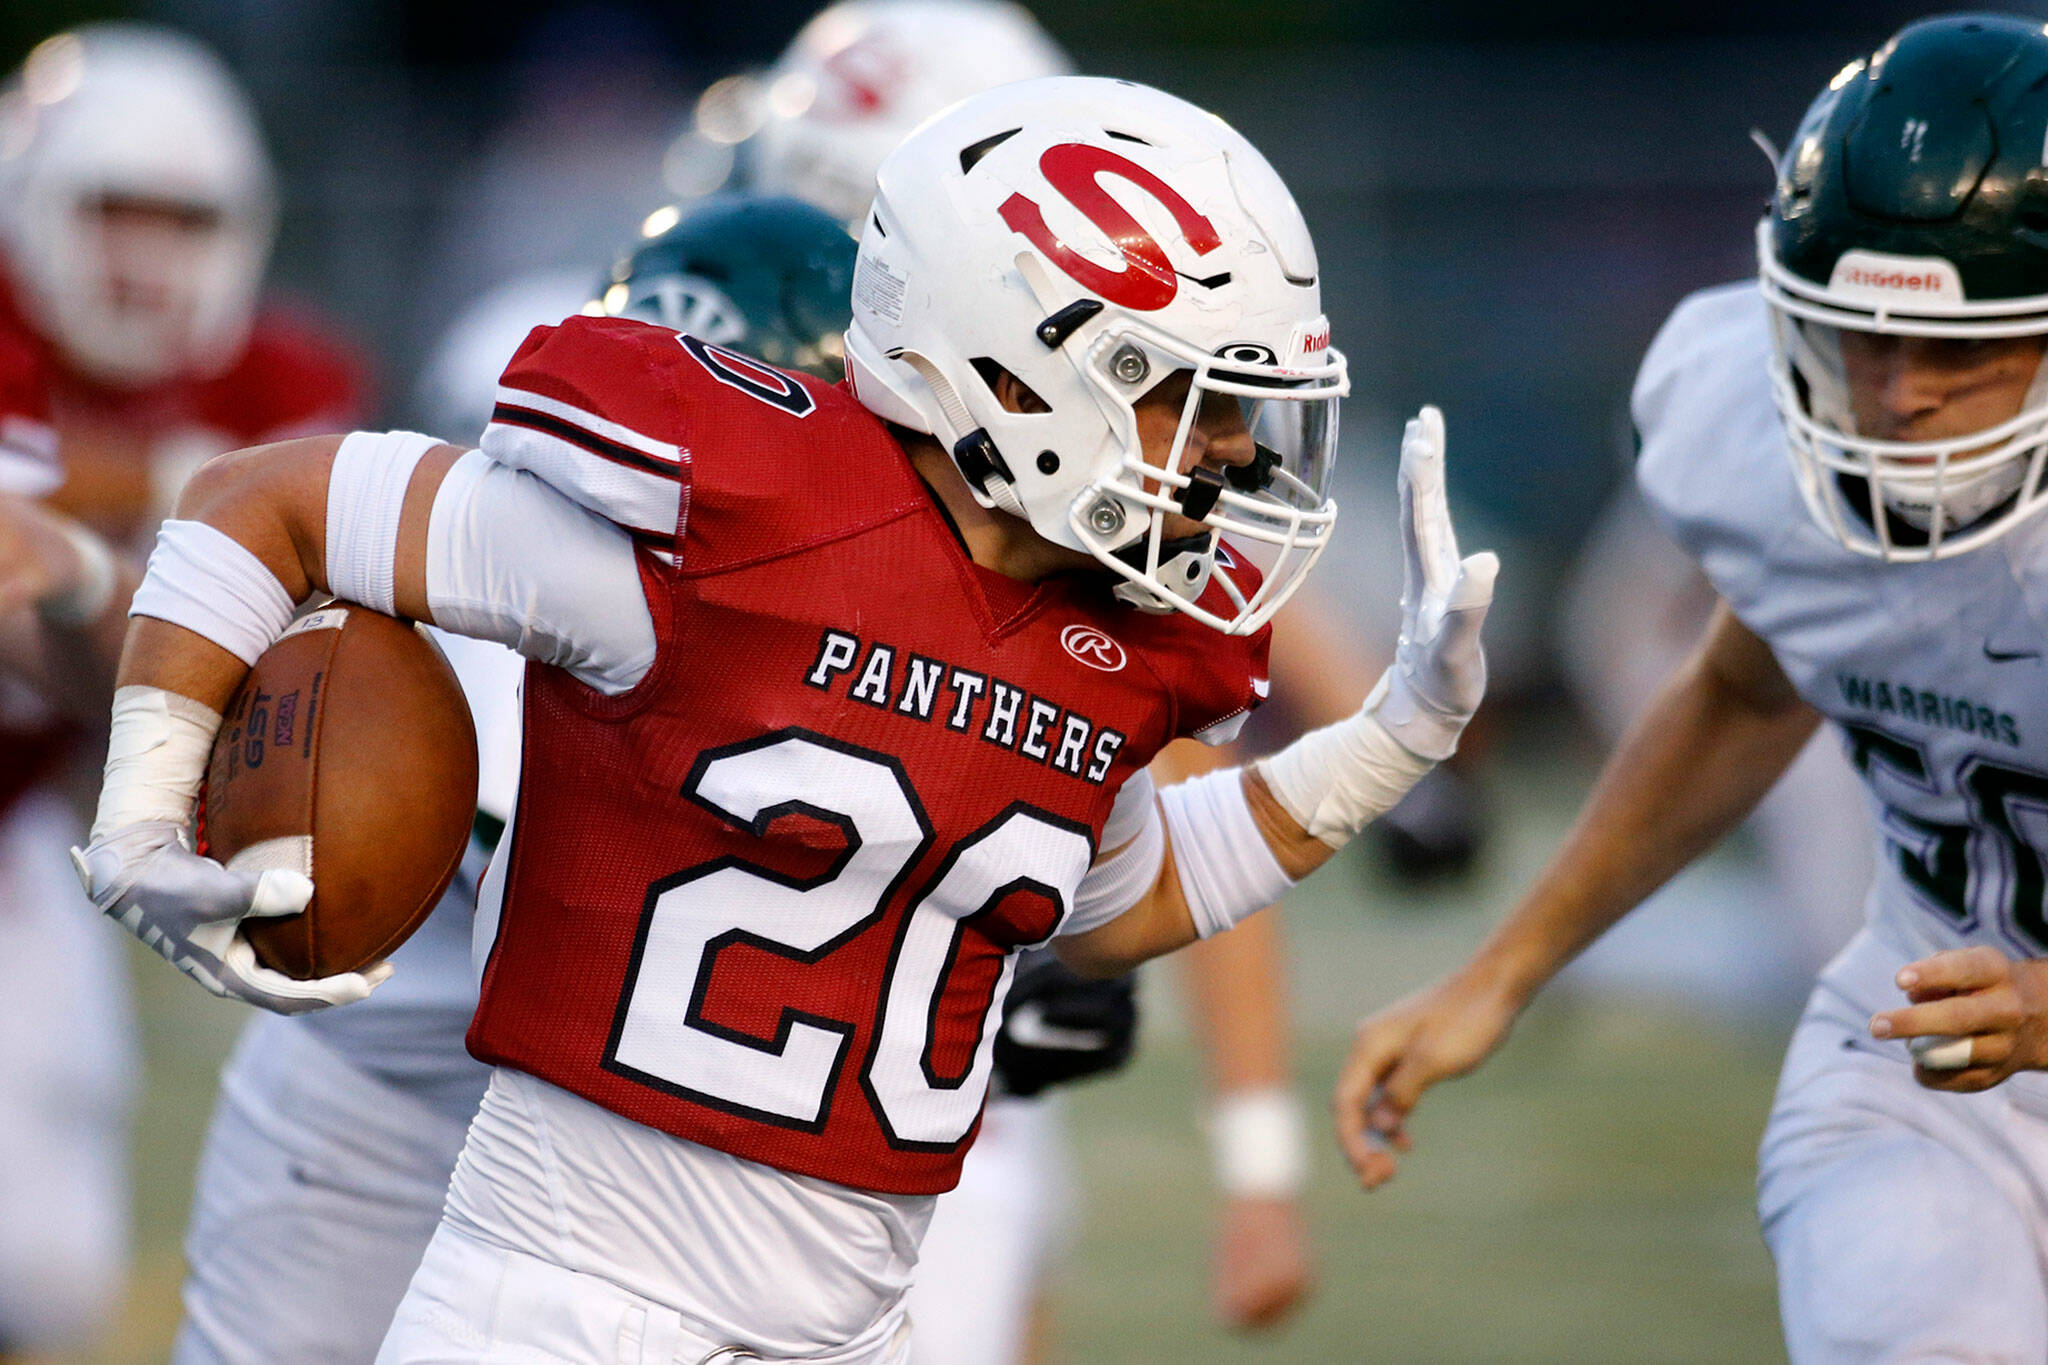 Snohomish’s Mason Orgill prepares to stiff-arm a defender on a big run against Edmonds-Woodway on Friday, Sep. 23, 2022, at Snohomish High School in Snohomish, Washington. (Ryan Berry / The Herald)